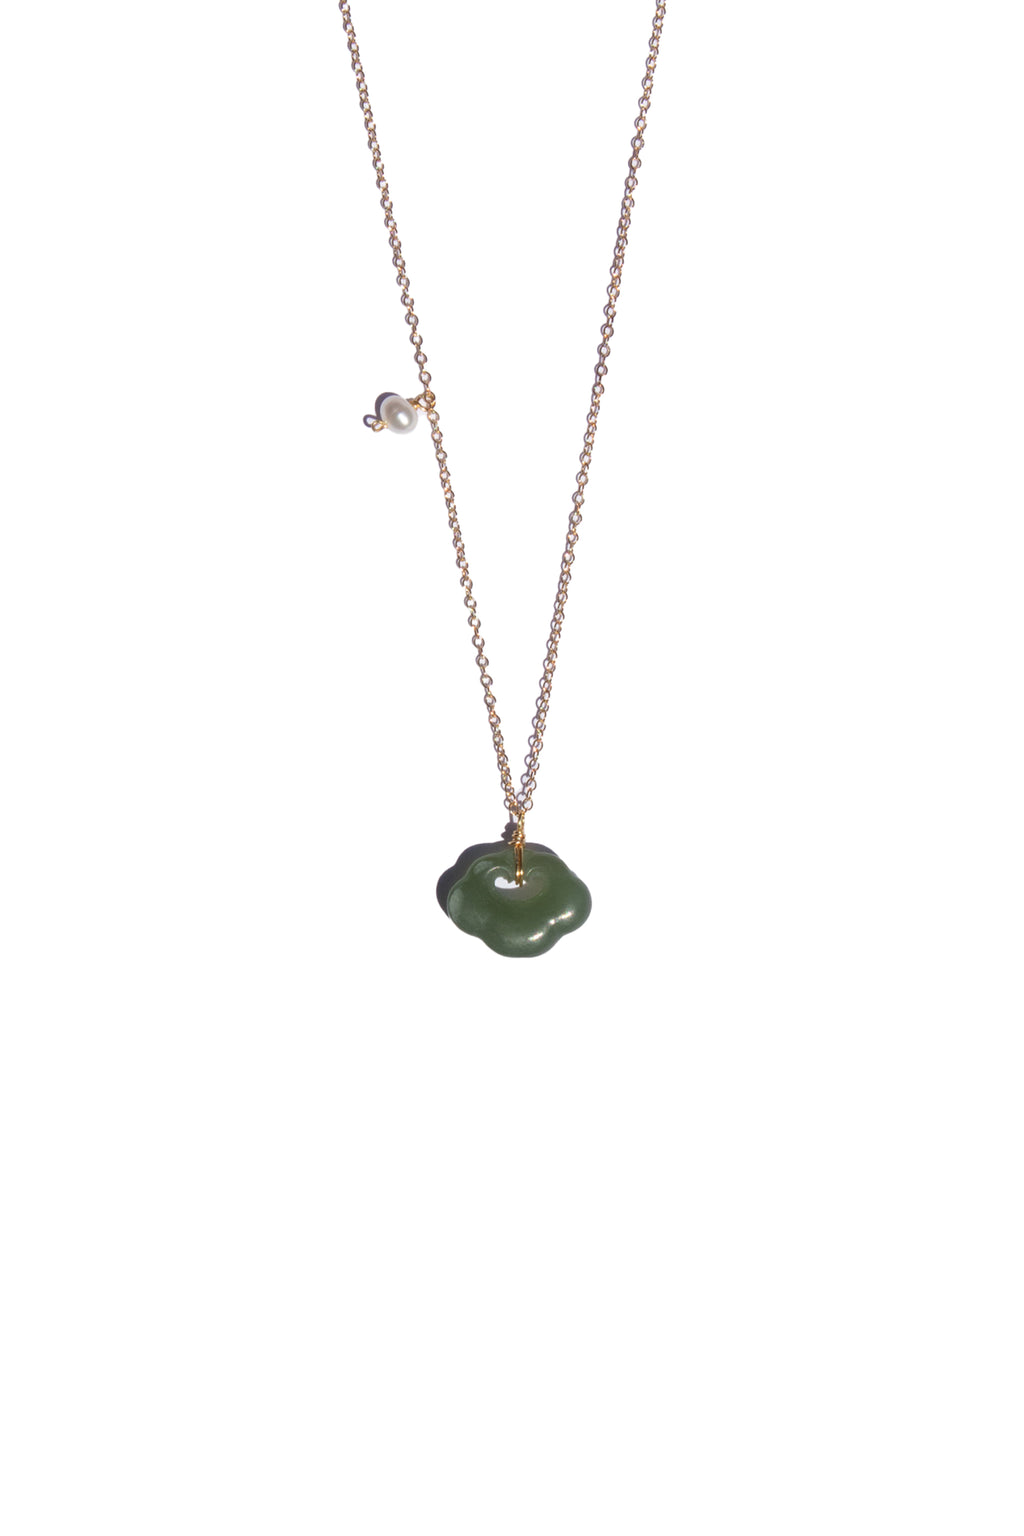 seree-cloud-necklace-nephrite-green